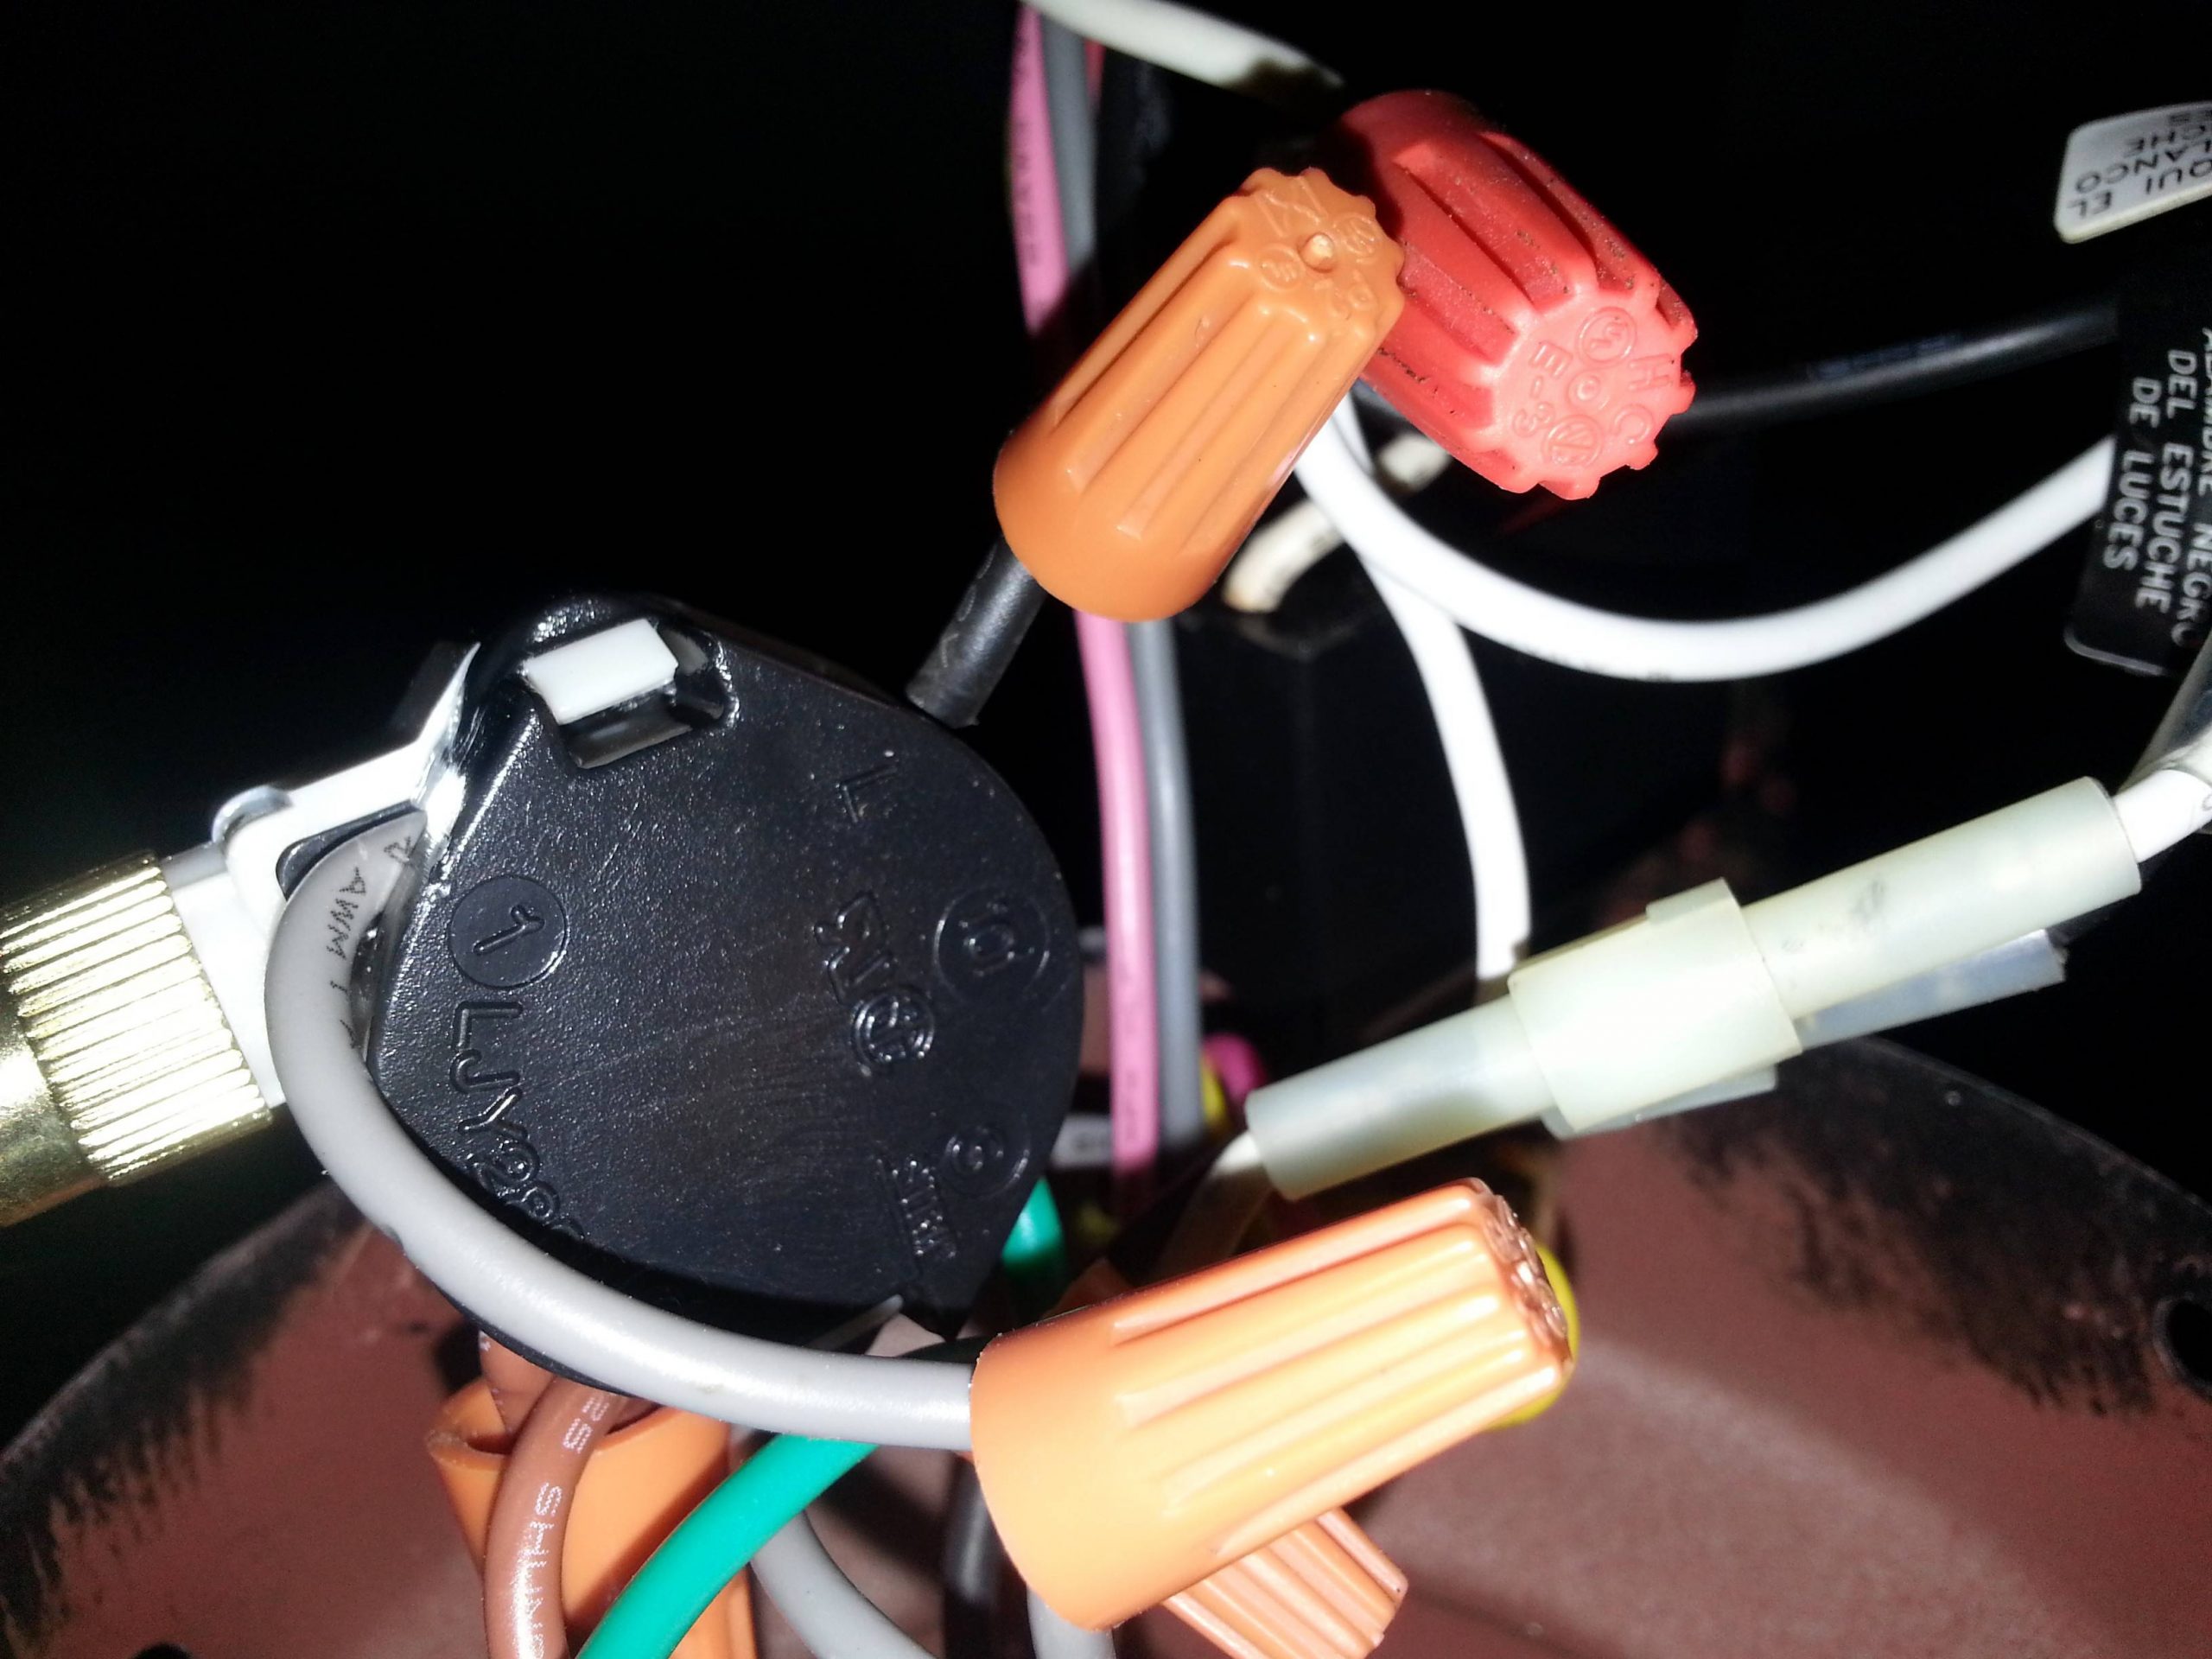 Wiring Ceiling Fan Switch Replacement Wiring Schematic pertaining to measurements 3264 X 2448